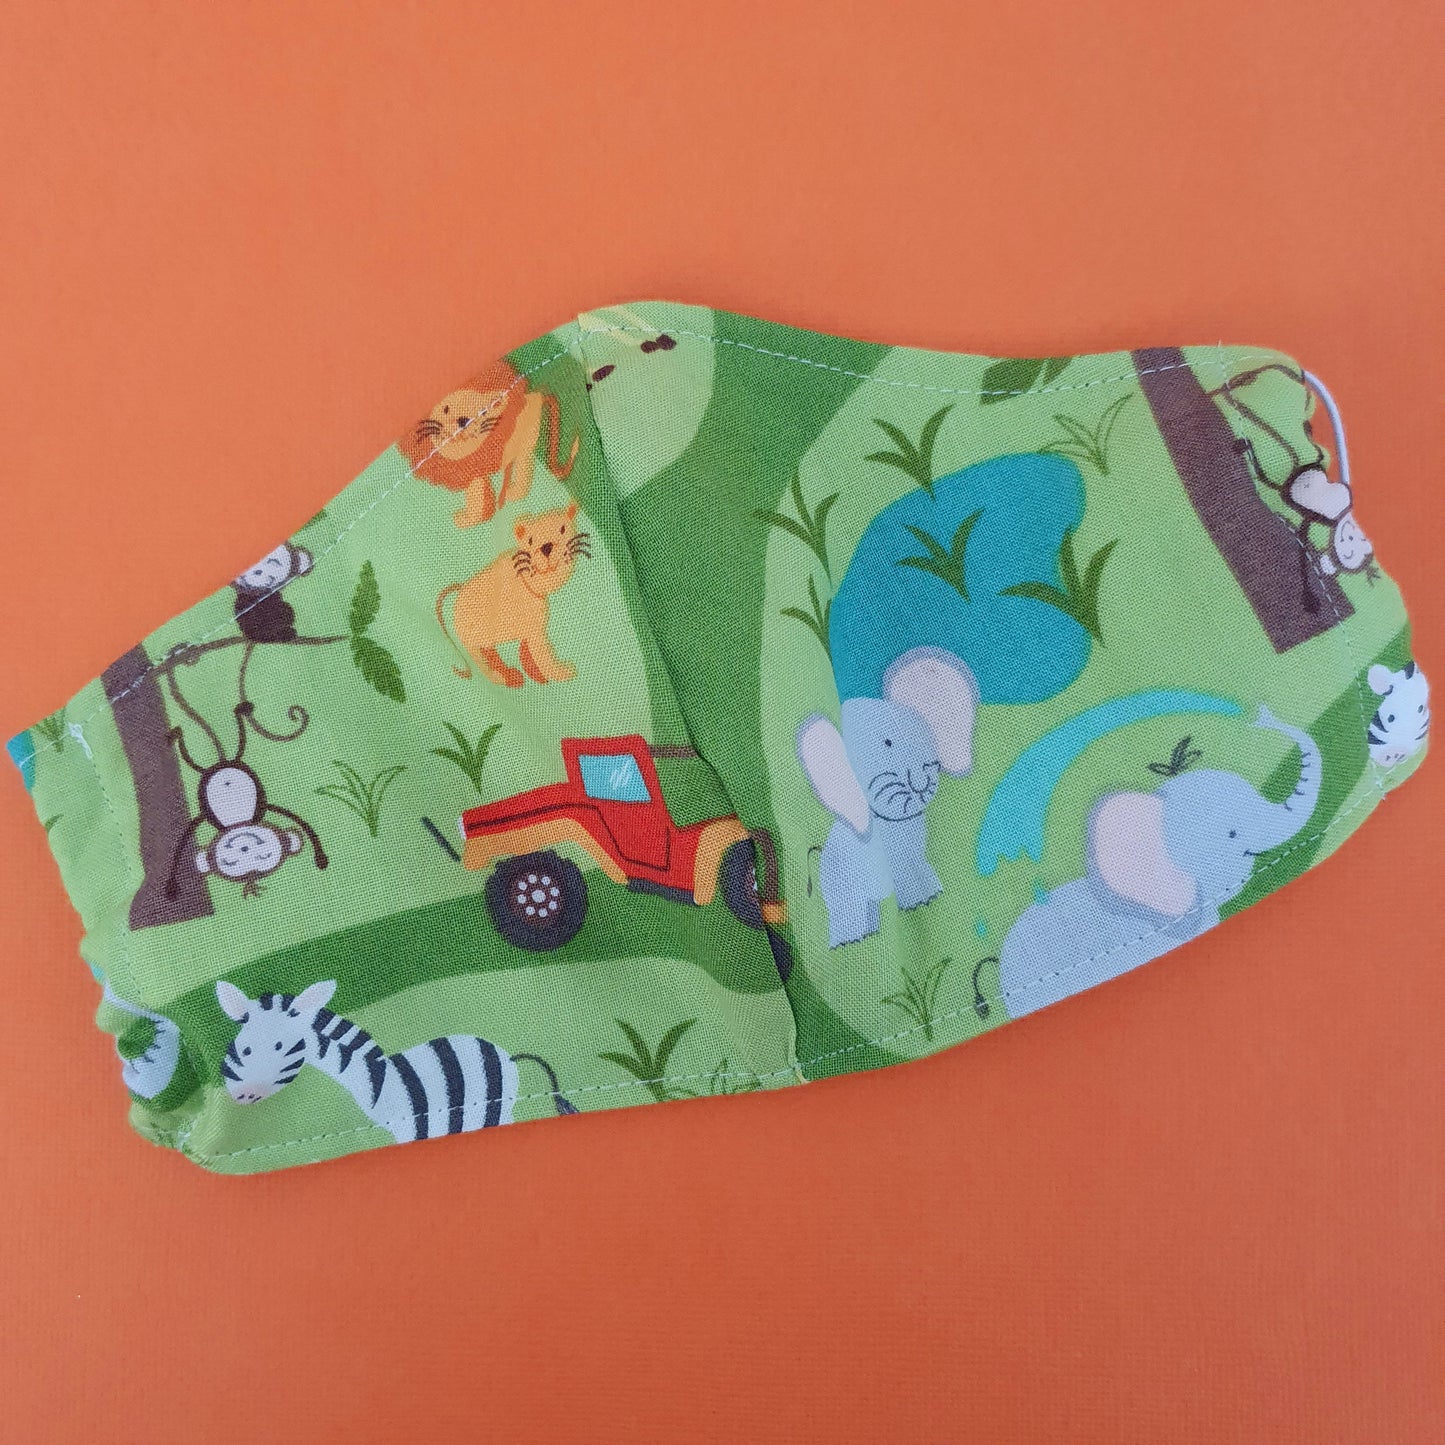 CHILD (Approx 4-10yrs) FACE MASK - Reusable,  Washable,  3 Layers 100% Cotton (Includes Filter Pocket)